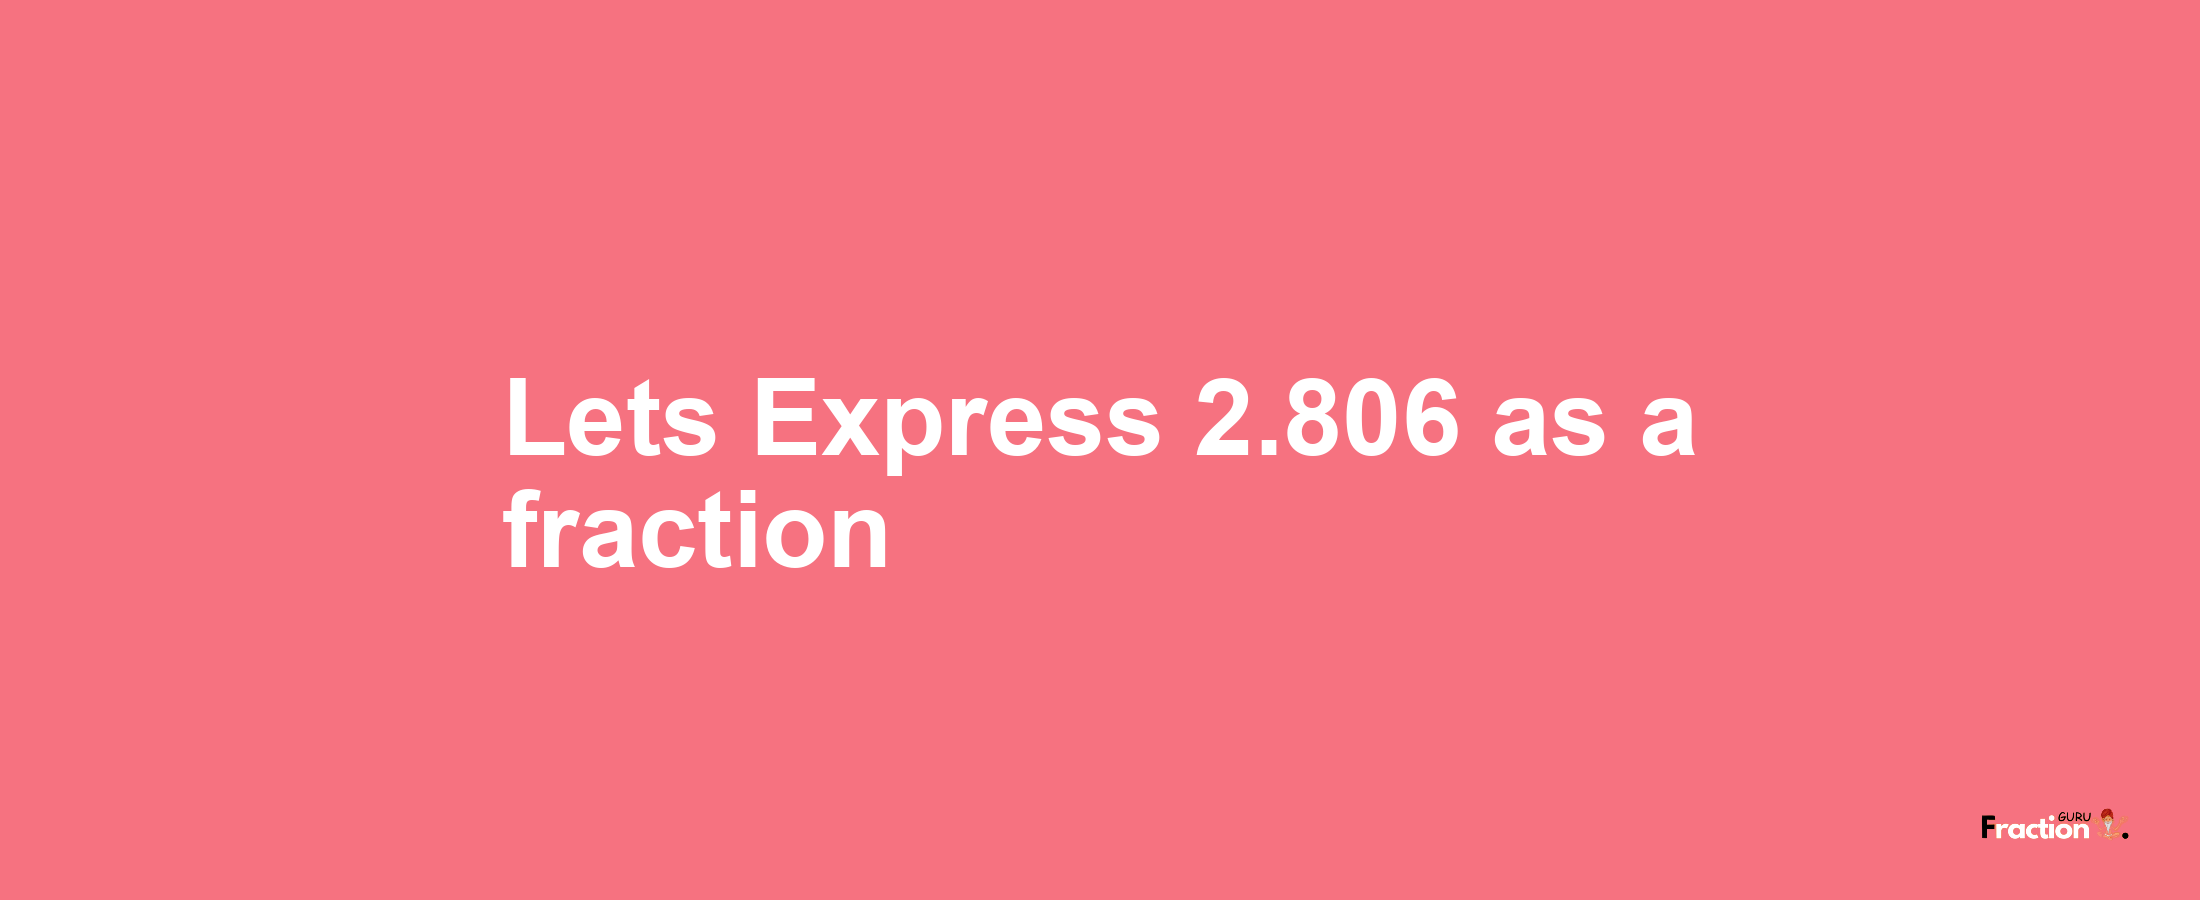 Lets Express 2.806 as afraction